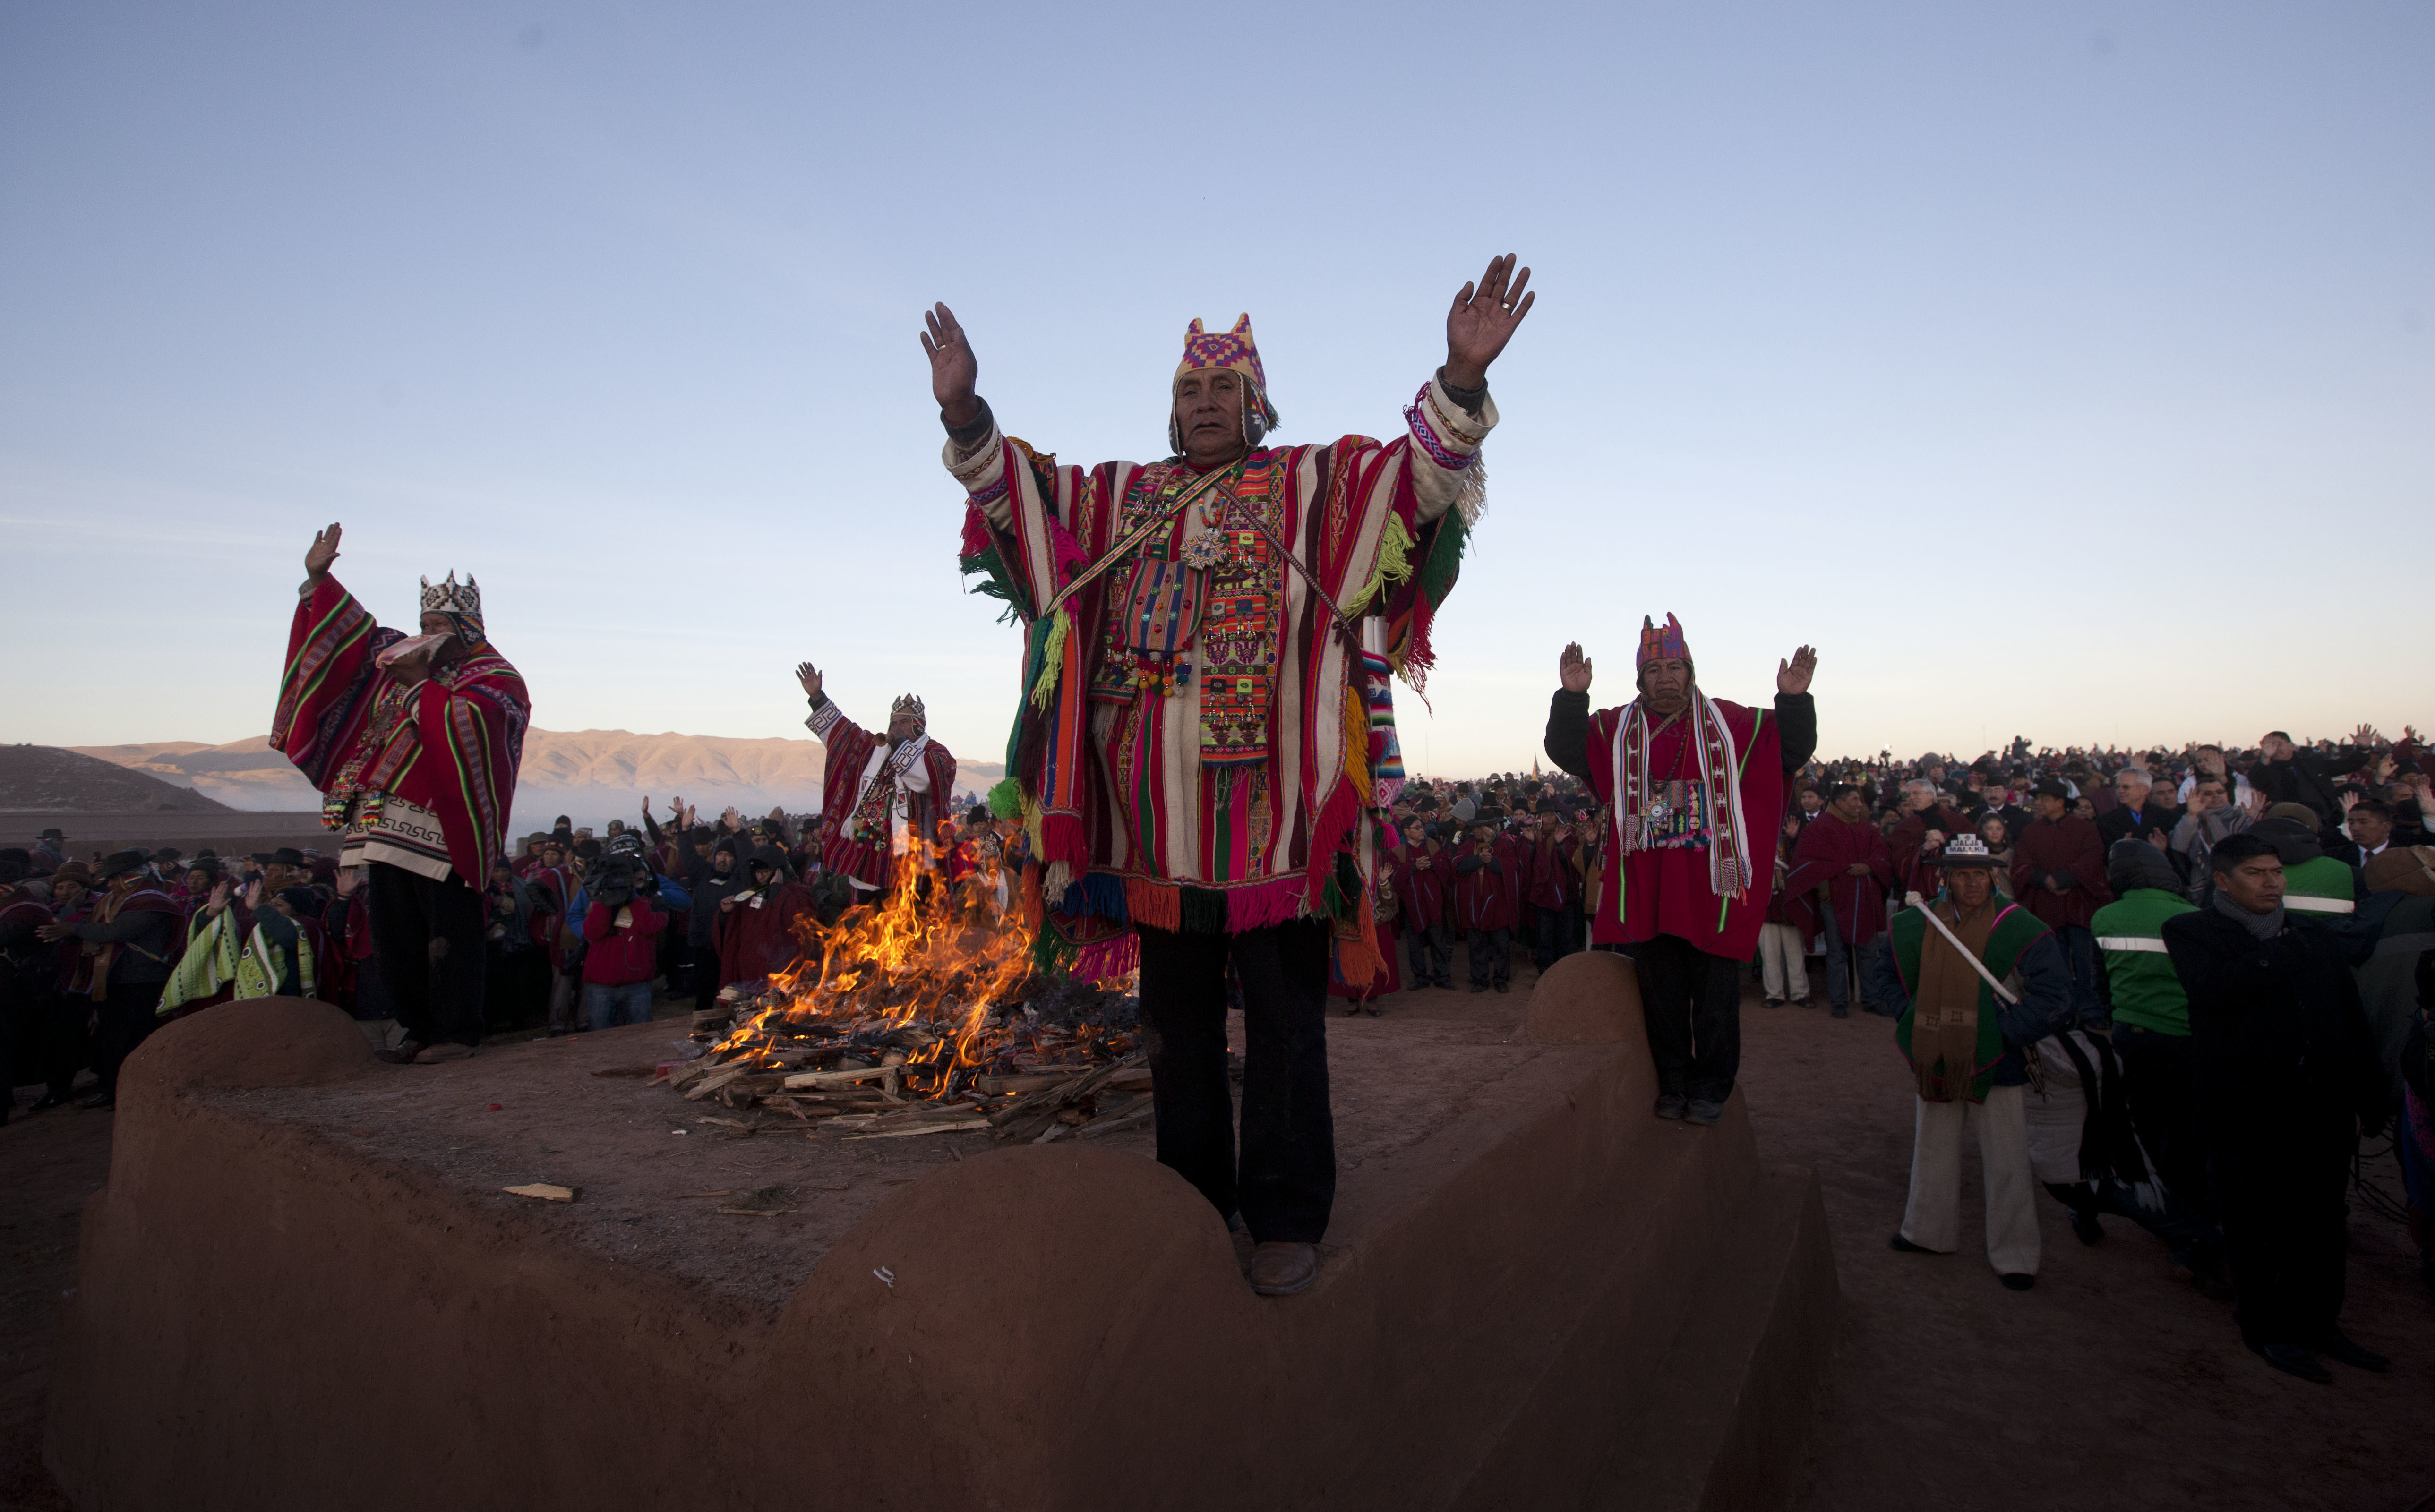 Andean religious leaders perform a New Year's ritual at the ruins of the ancient civilization of Tiwanaku, Bolivia, early Wednesday, June 21, 2017. Bolivia's Aymara Indians are celebrating the year 5,525 as well as the Southern Hemisphere's winter solstice, which marks the start of a new agricultural cycle. (AP Photo/Juan Karita)